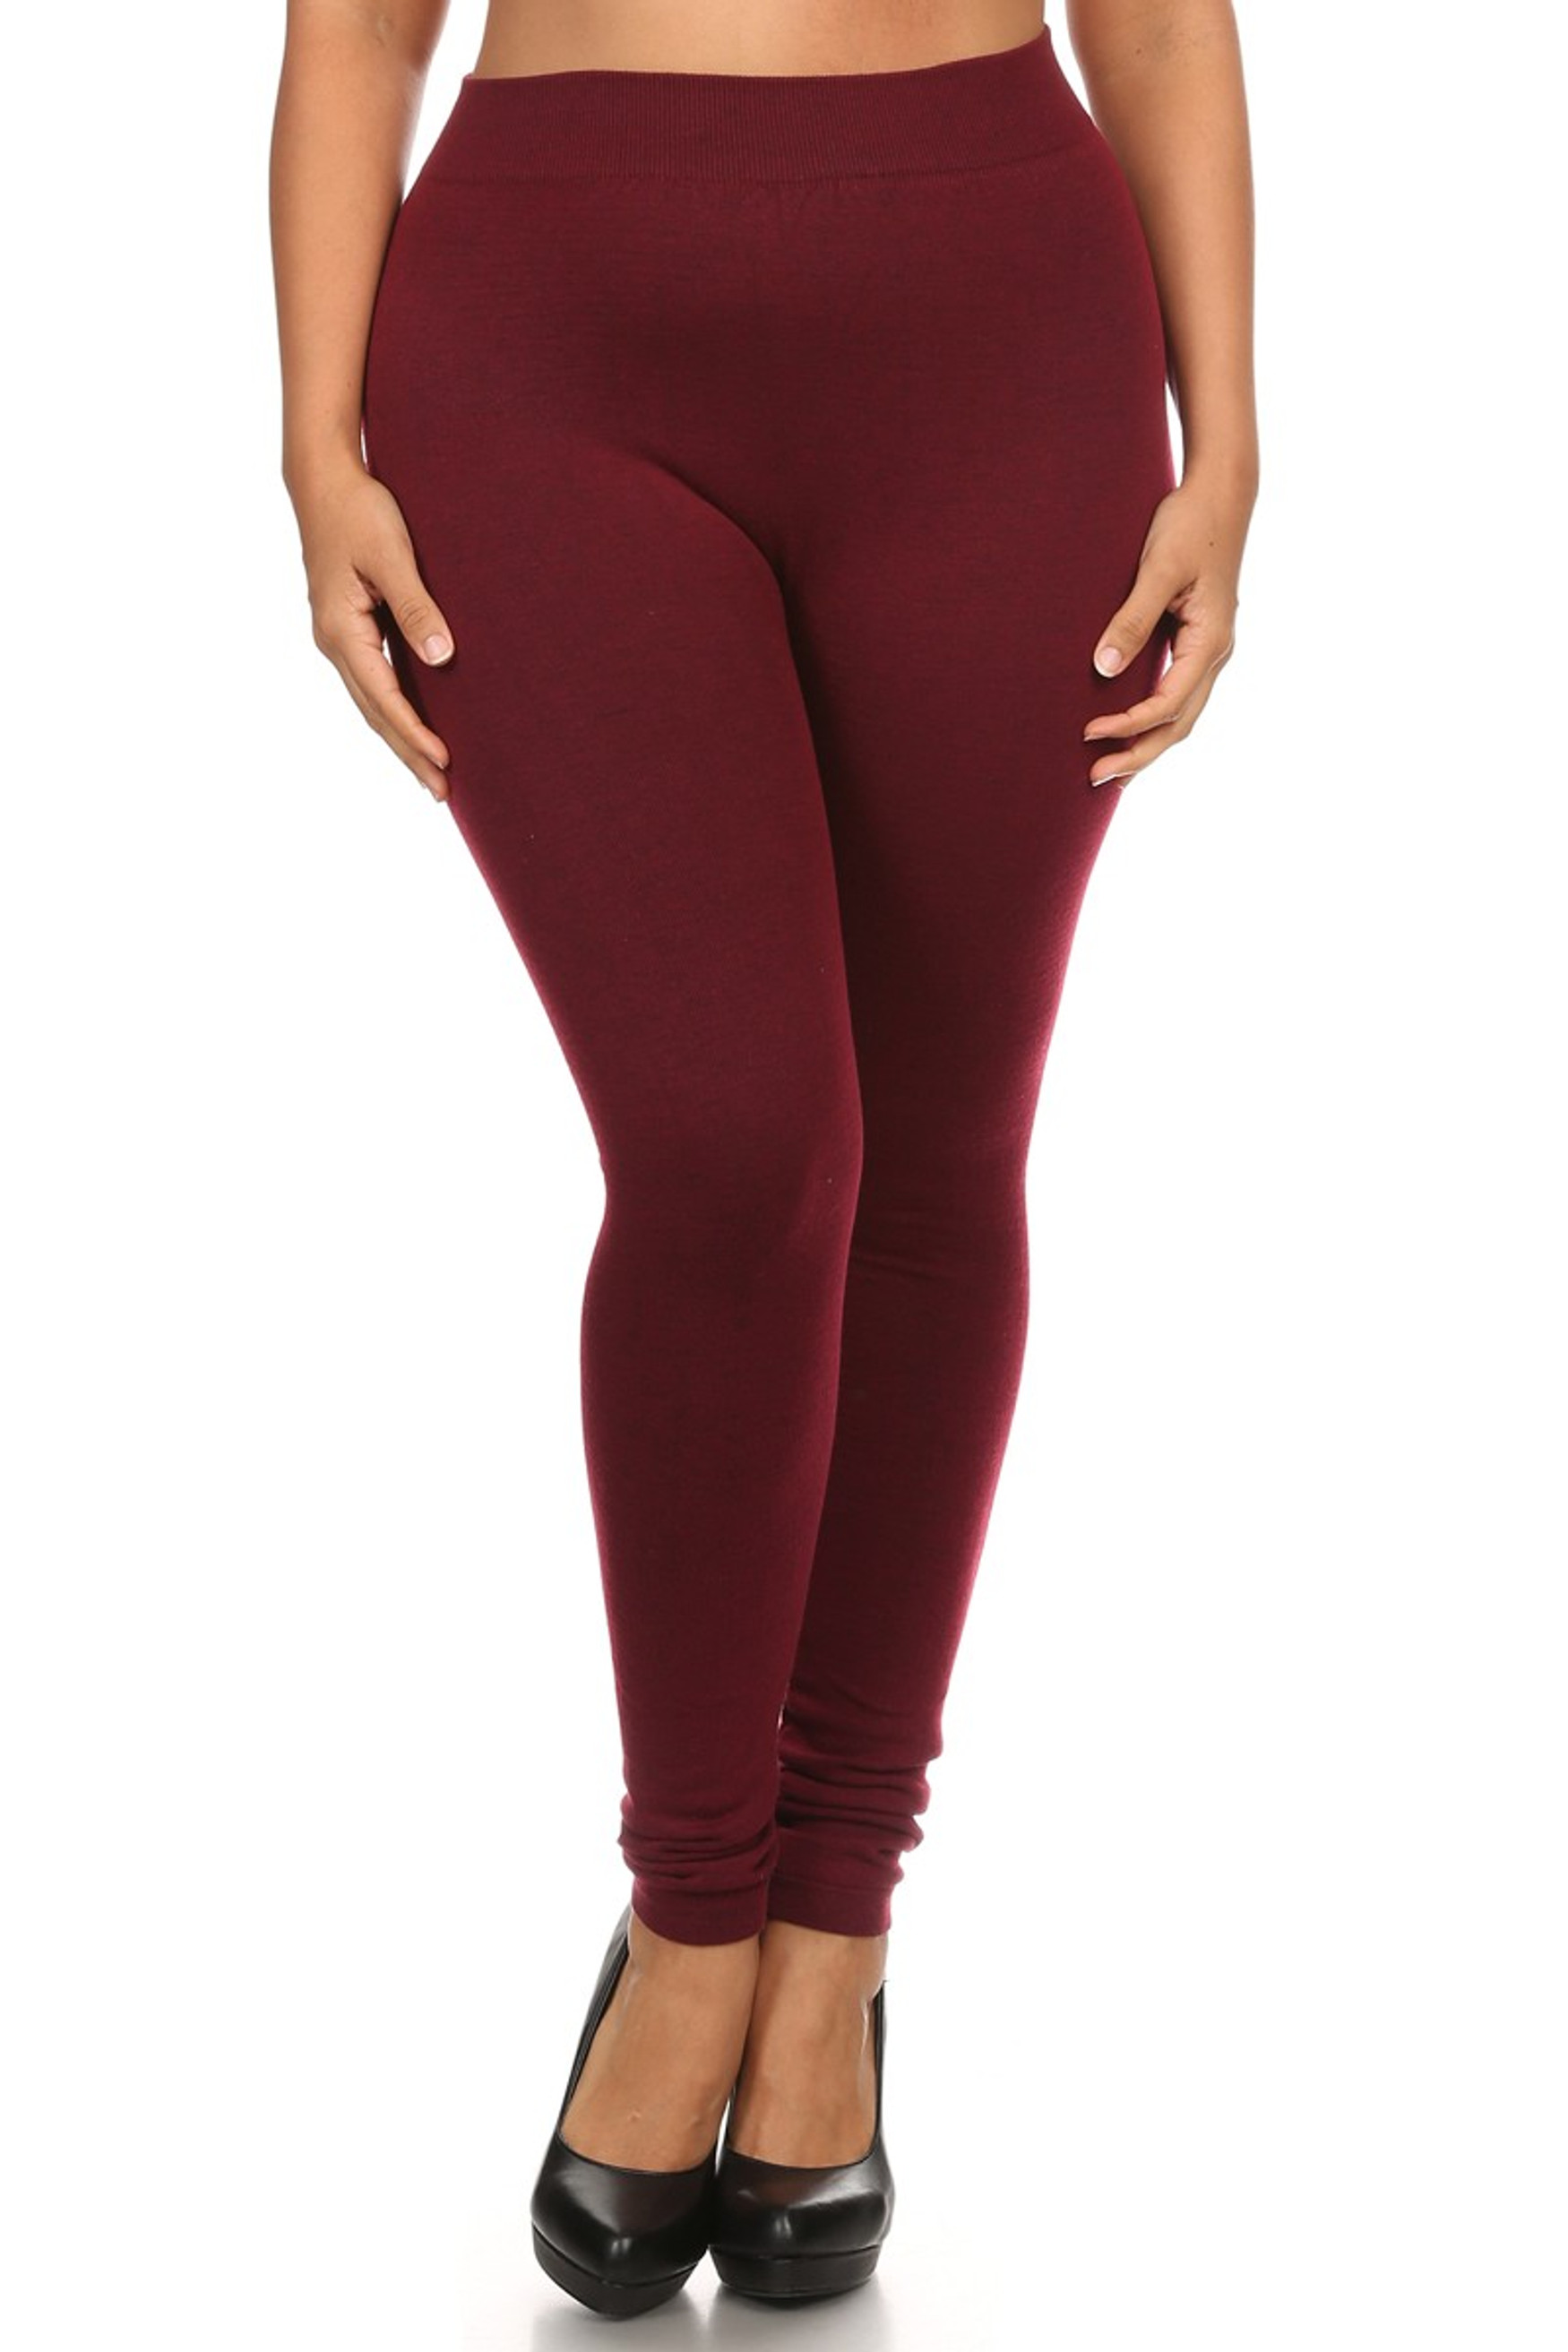 French Terry Leggings - Plus Size